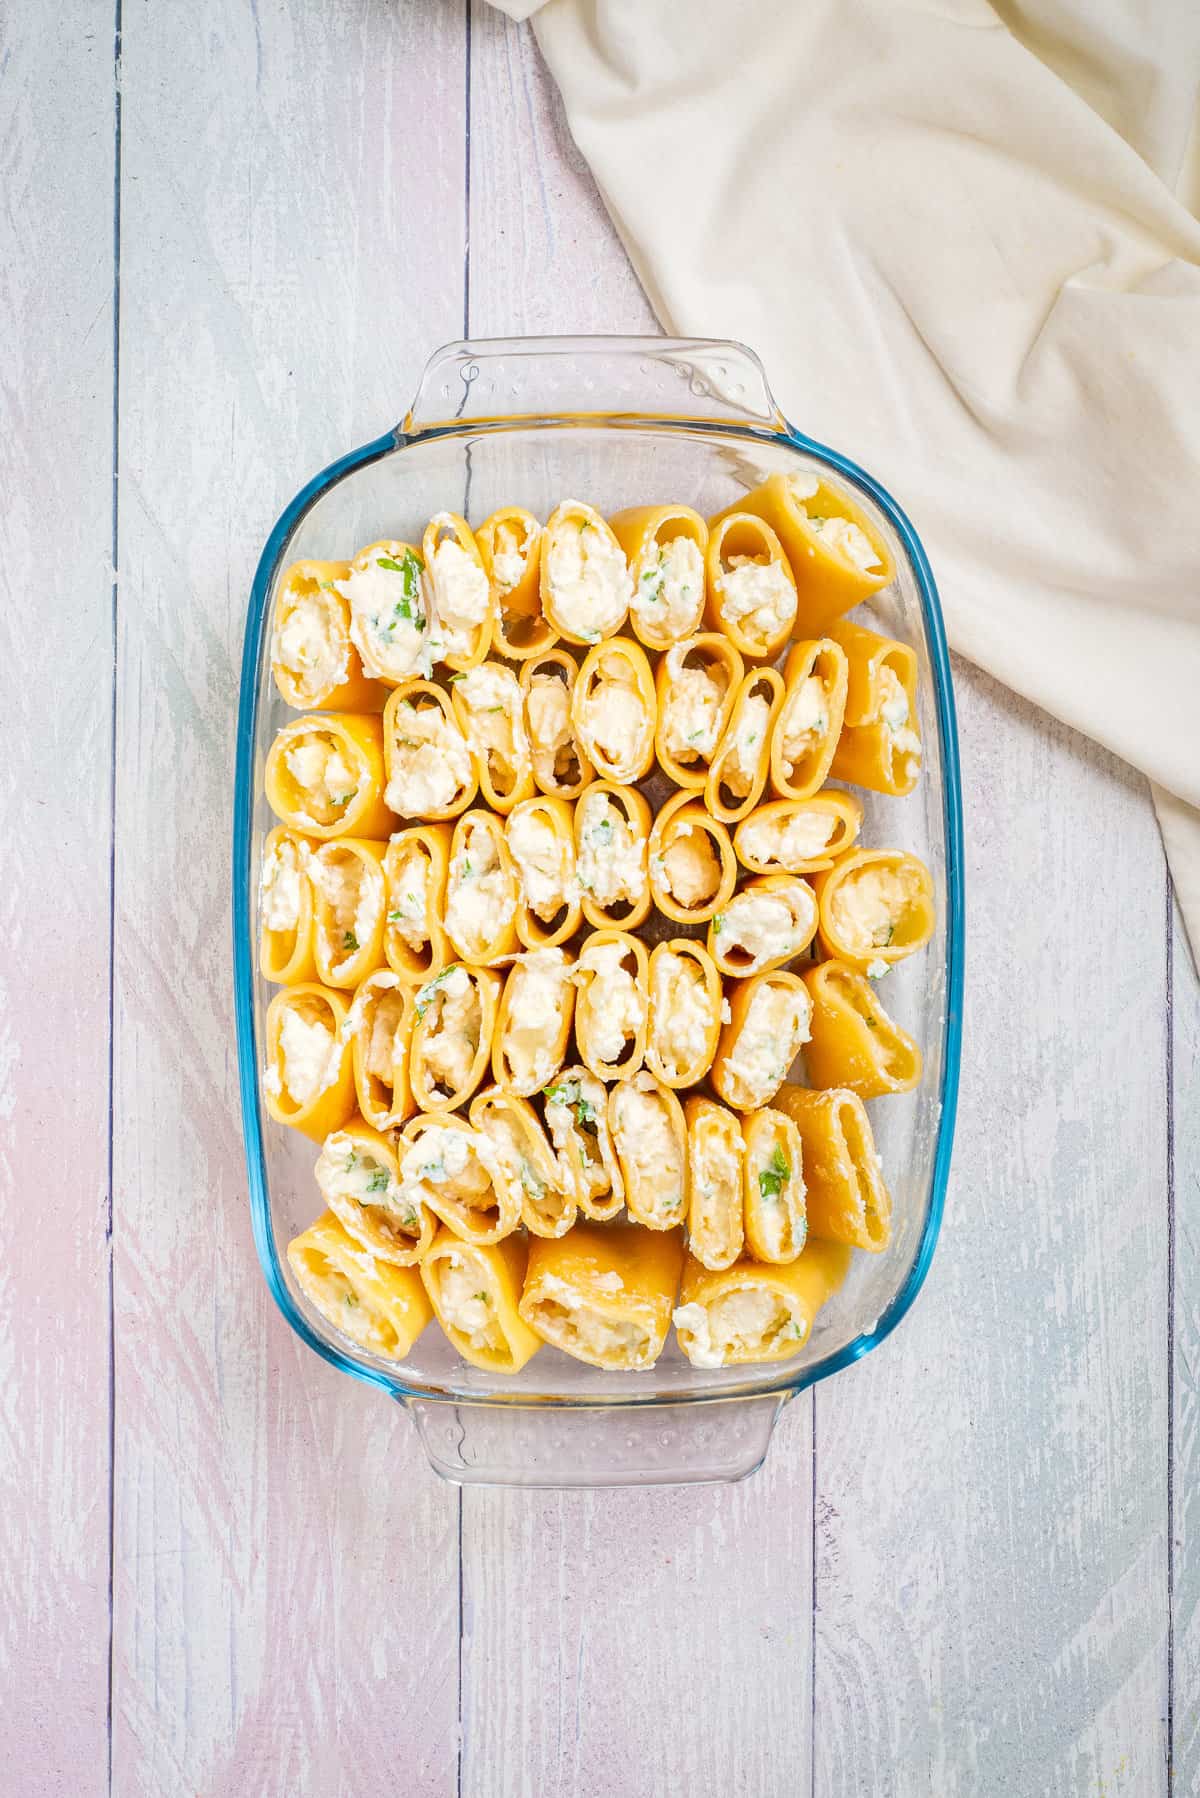 Overhead view of a baking dish with arranged pasta filled with cheese mixture.